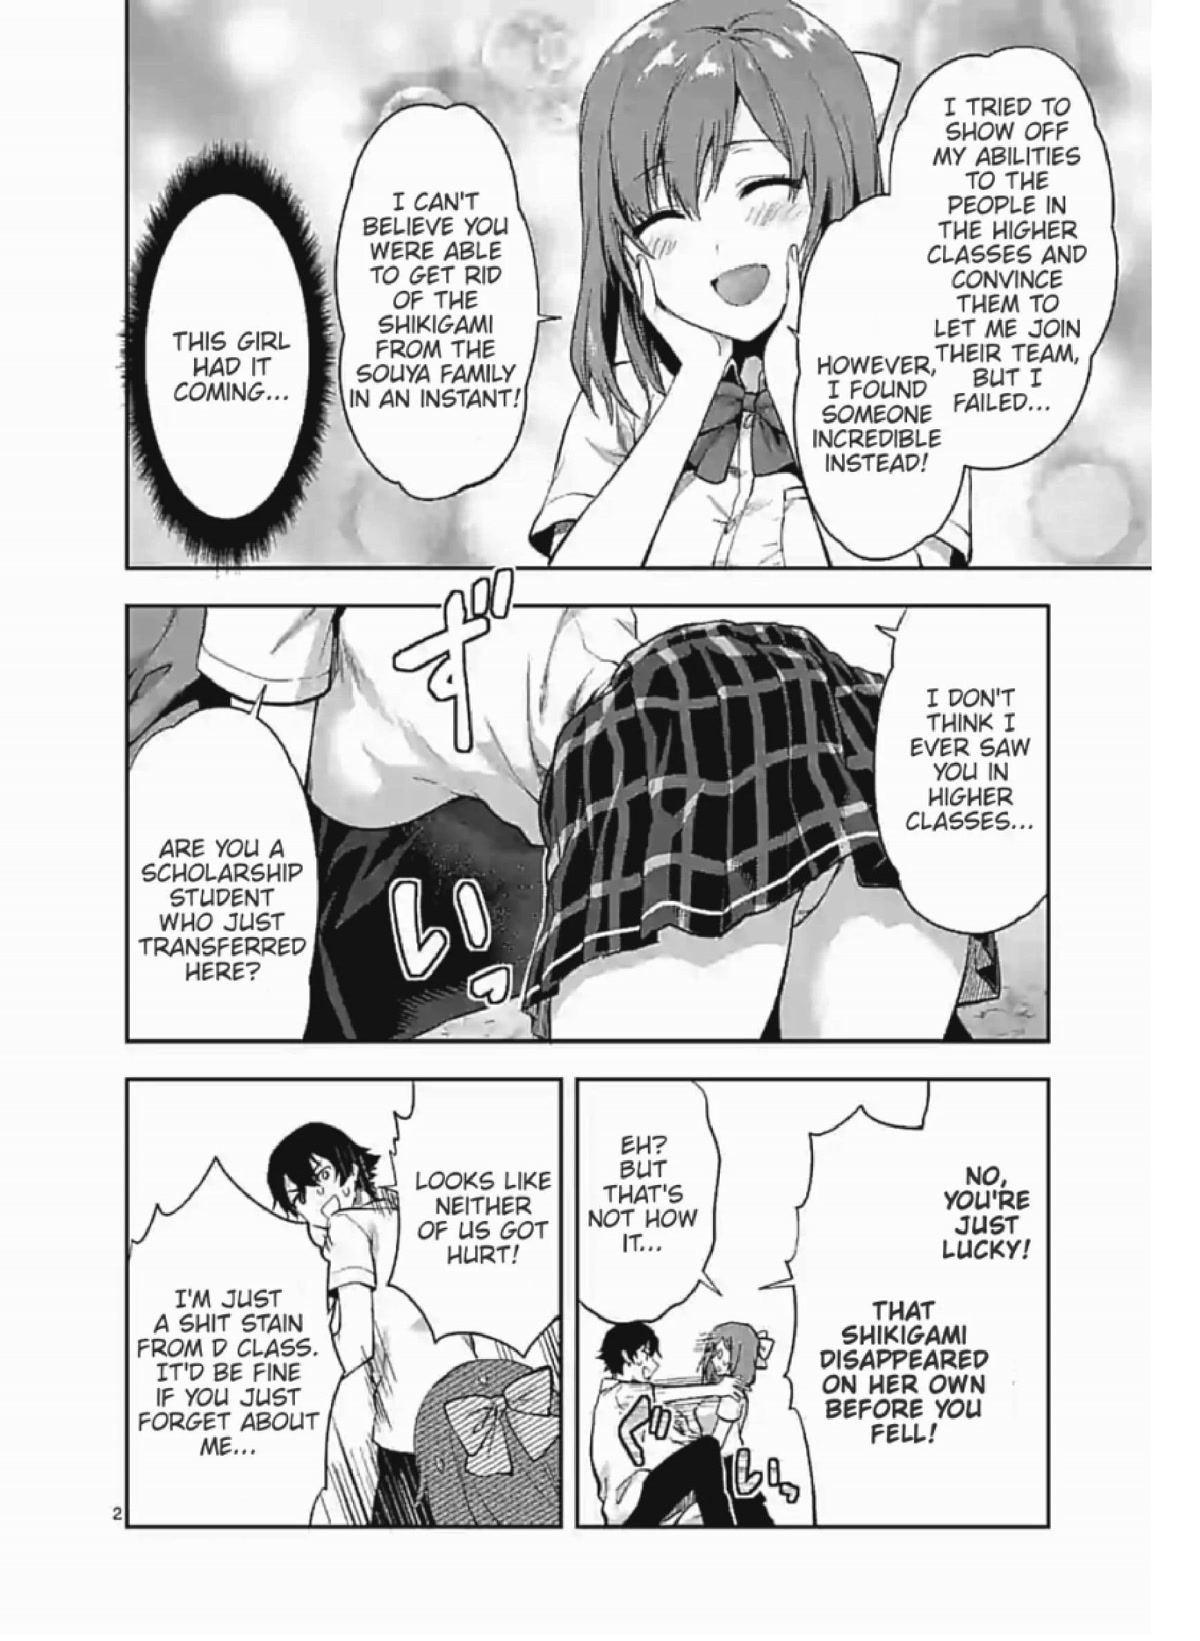 Climax Exorcism With A Single Touch! - Page 2